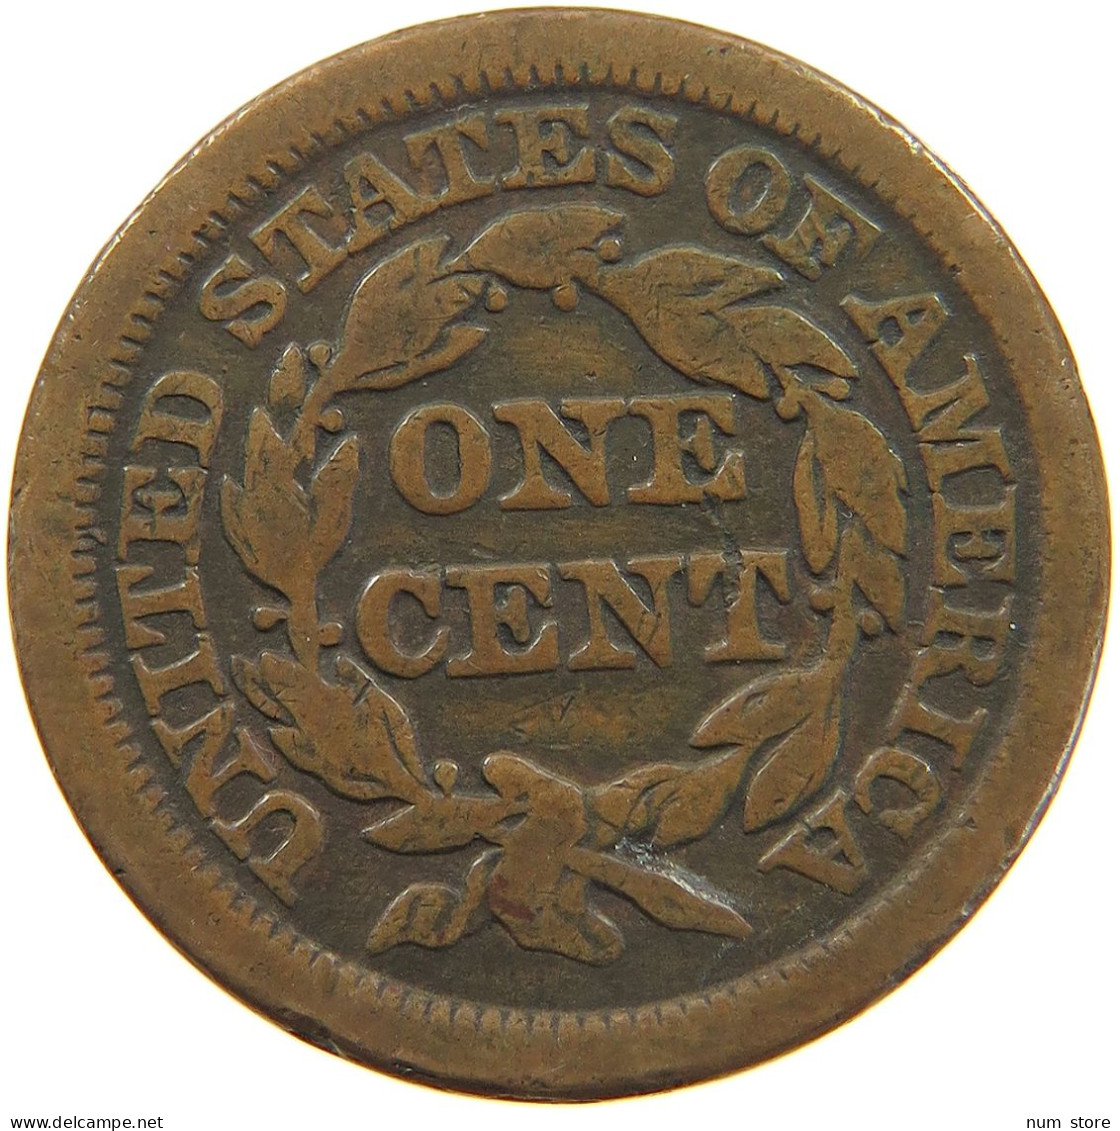 UNITED STATES OF AMERICA LARGE CENT 1848 BRAIDED HAIR #t114 1073 - 1840-1857: Braided Hair